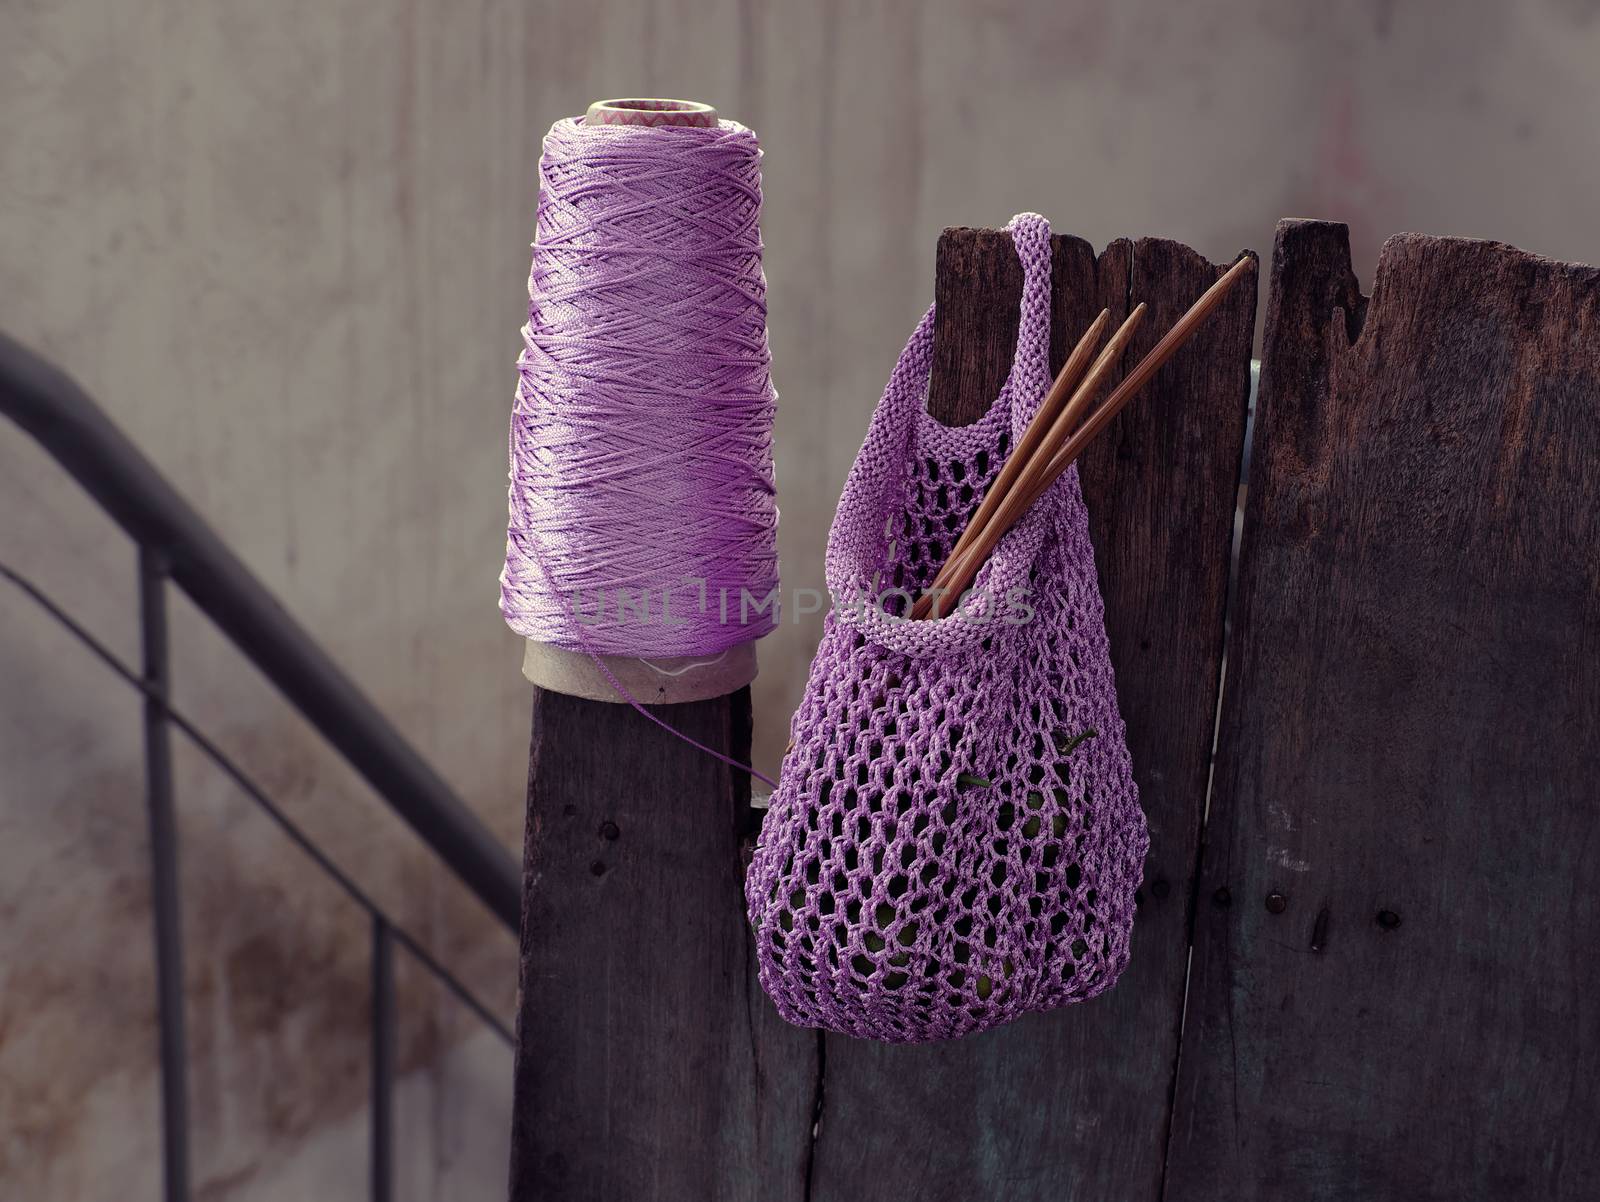 Handmade handbag to go market, hand bag knit from purple yarn, hobby leisure to make gift for woman or mom in mother day